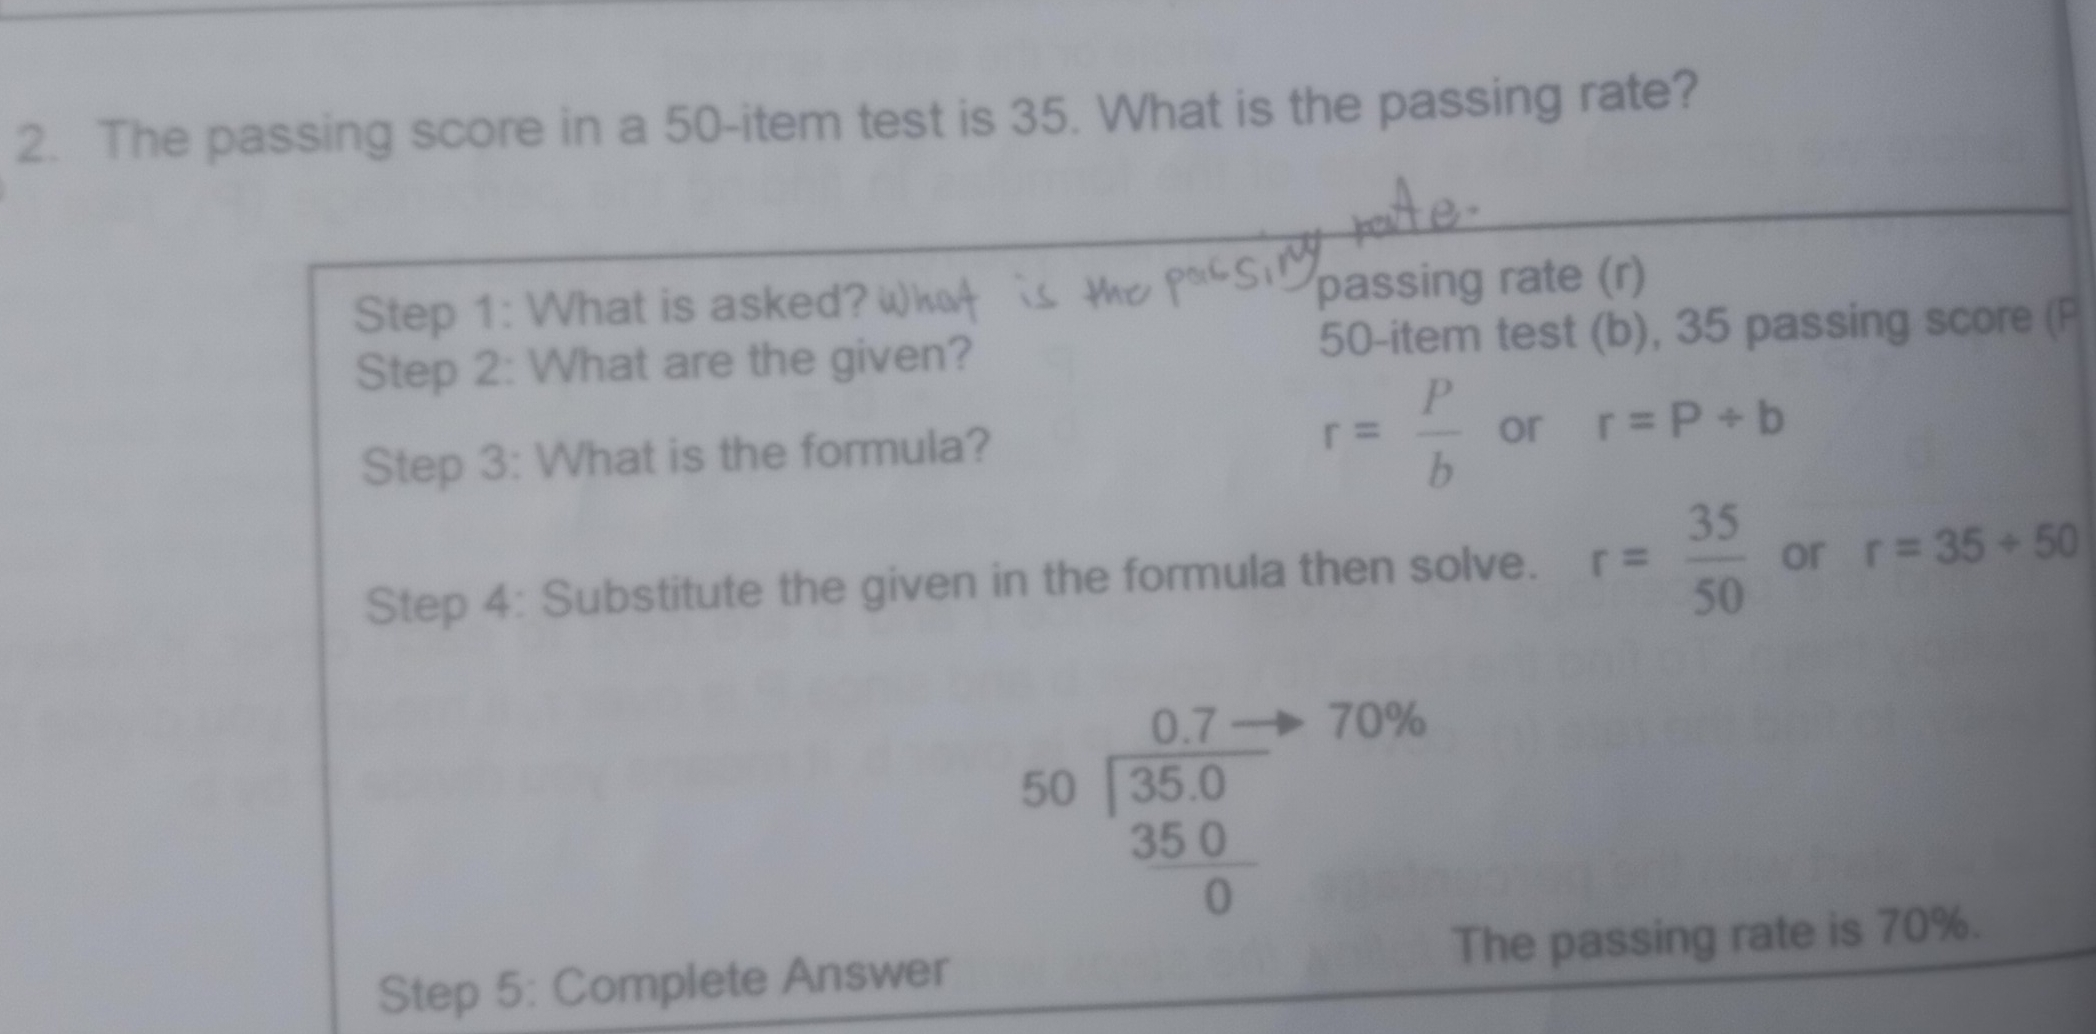 2. The passing score in a 50-item test is 35. What is the passing rate? Step 1: What is asked?wh passing rate r Step 2: What are the given? 50-item test b, 35 passing score P r= P/b or Step 3: What is the formula? r=P / b Step 4: Substitute the given in the formula then solve. r= 35/50 or r=35+50 beginarrayr 0.7- 55.0 35.0/0 endarray 70% Step 5: Complete Answer The passing rate is 70%.